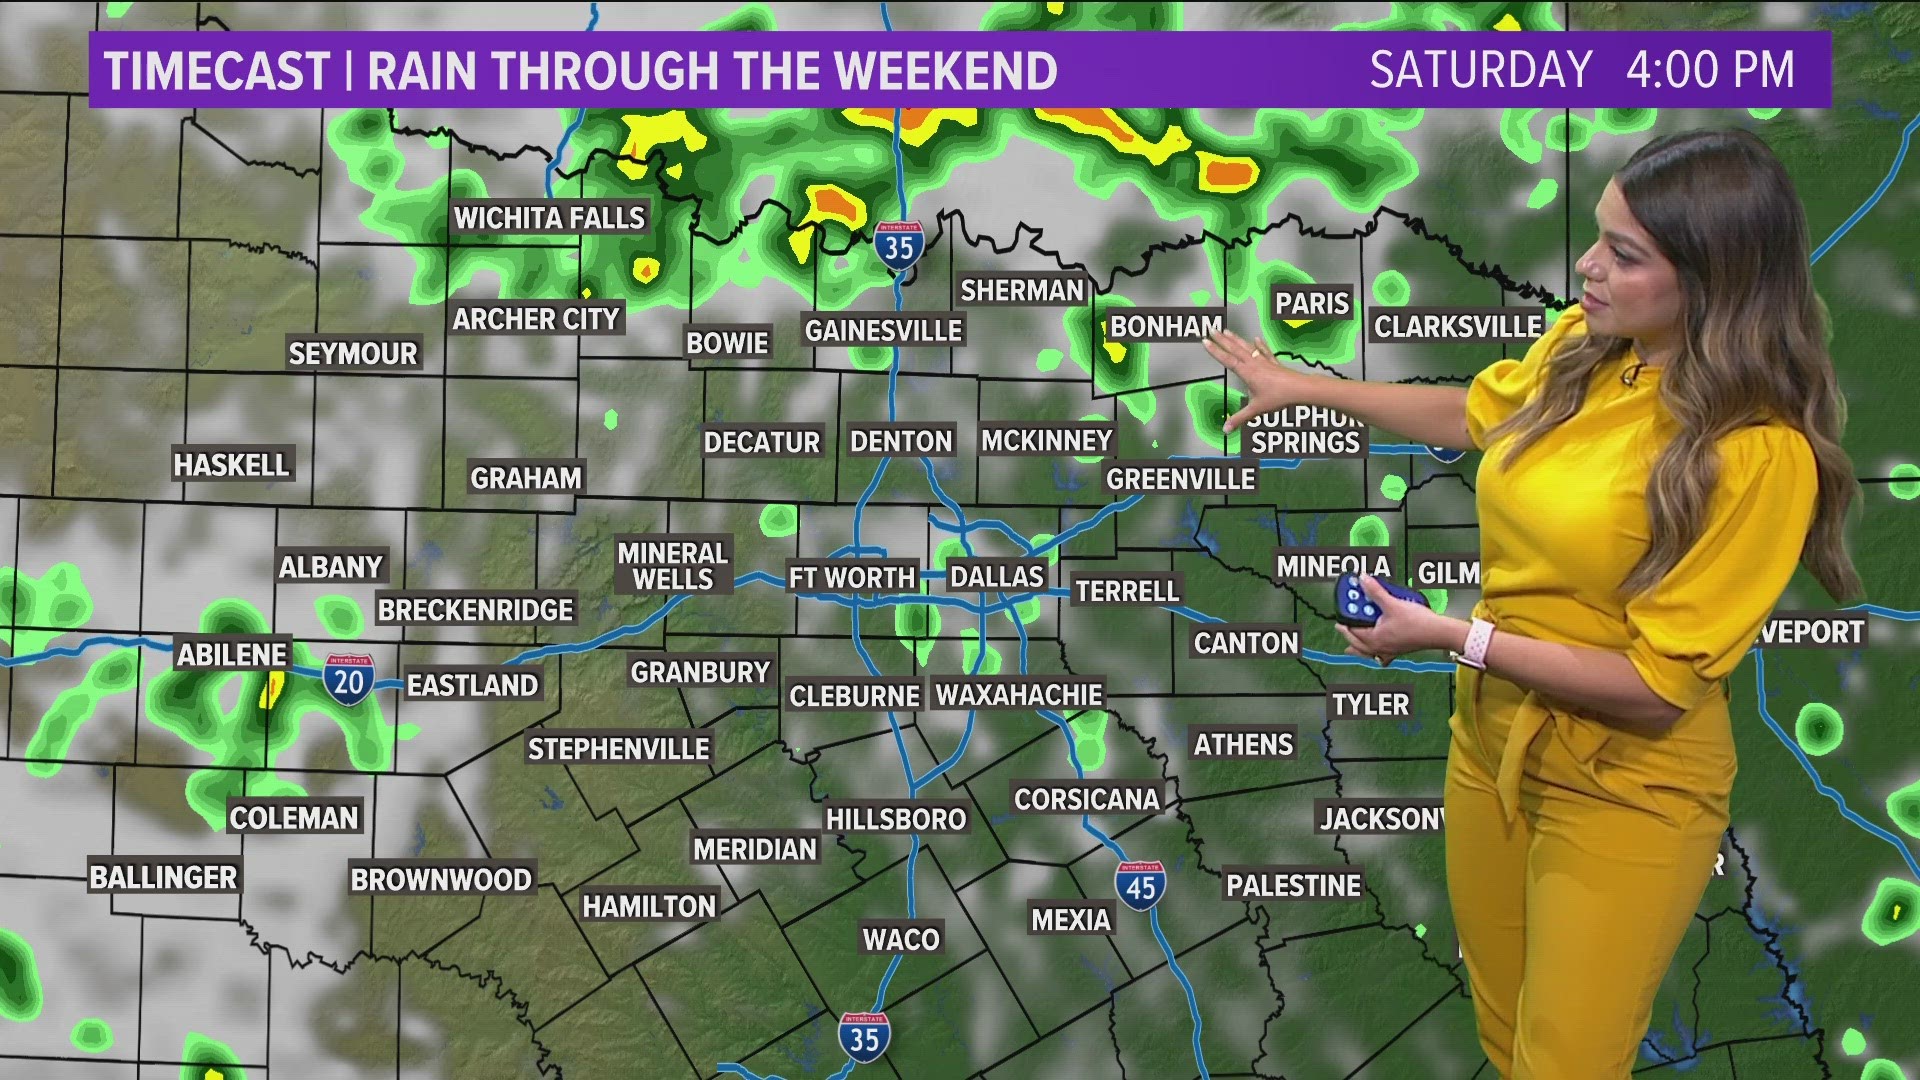 DFW Weather: Warm weather continues with rain returning for the weekend. Update with Meteorologist Mariel Ruiz.